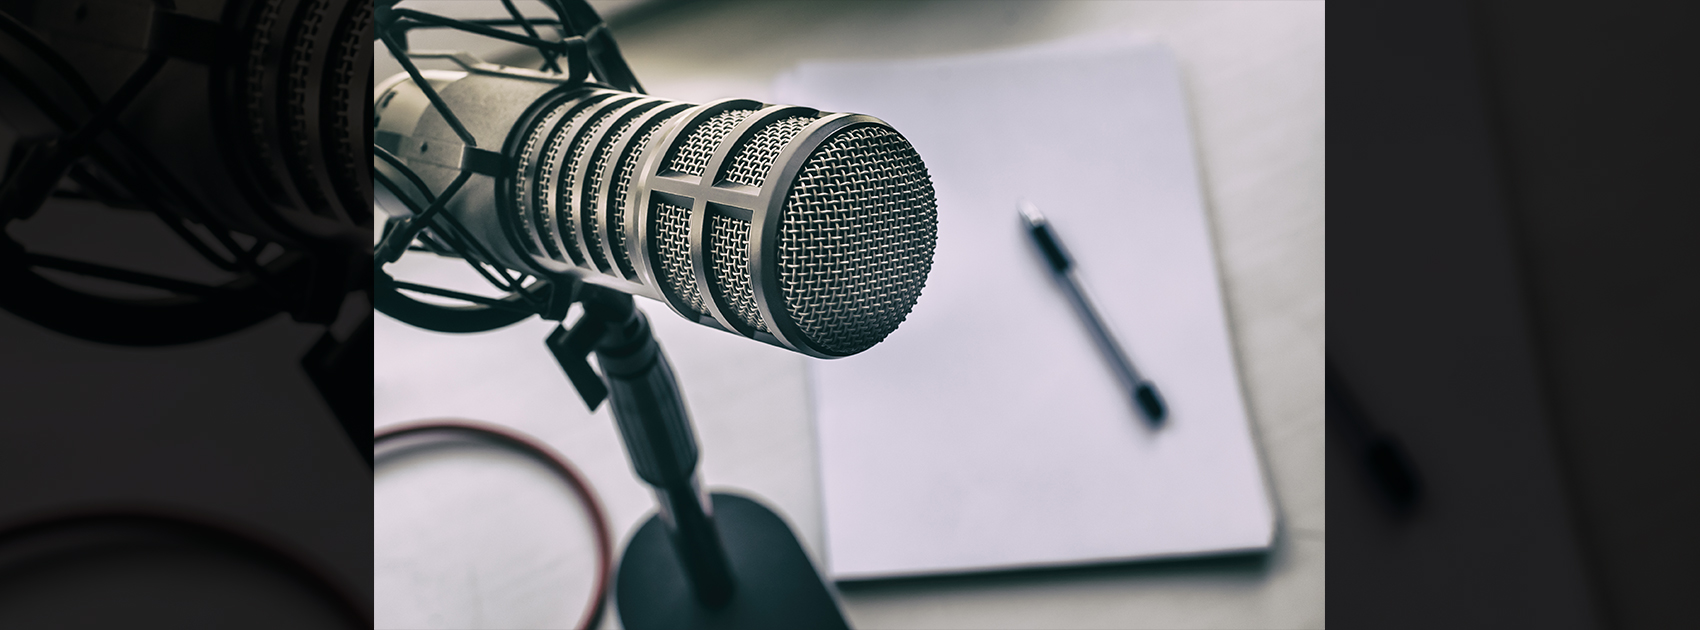 Podcasts For Every Entrepreneur,Startup Stories,2019 Best Inspirational Stories,Entrepreneur Podcasts,best entrepreneur Podcasts 2019,Startup Podcast,5 Podcasts Every Entrepreneur,5 Best Podcasts for Entrepreneur,Small Business Podcasts